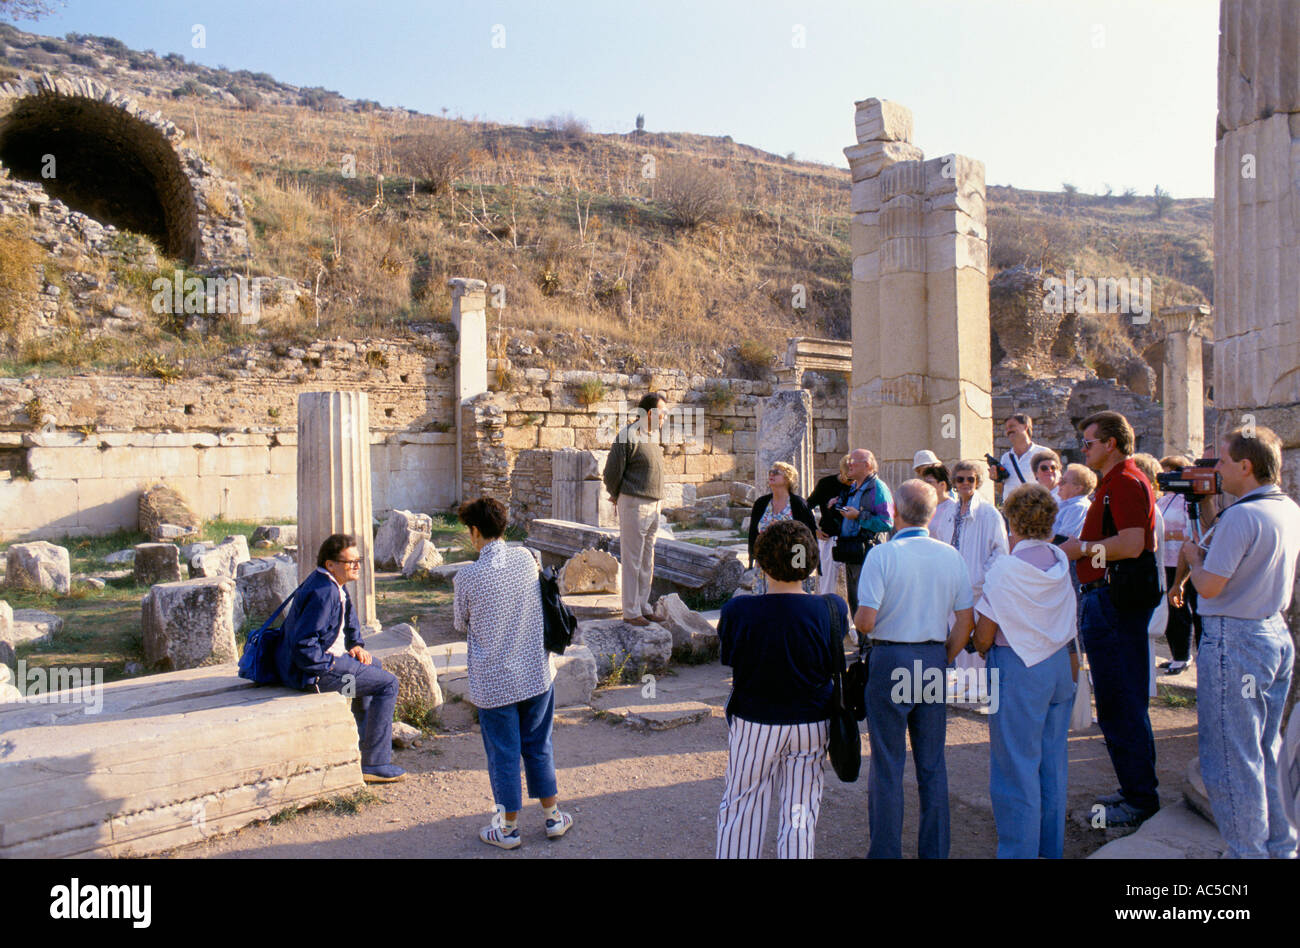 WESTERN TOURISTS ON GUIDED TOUR OF THE ANCIENT RUINS AT EPHESUS Stock Photo